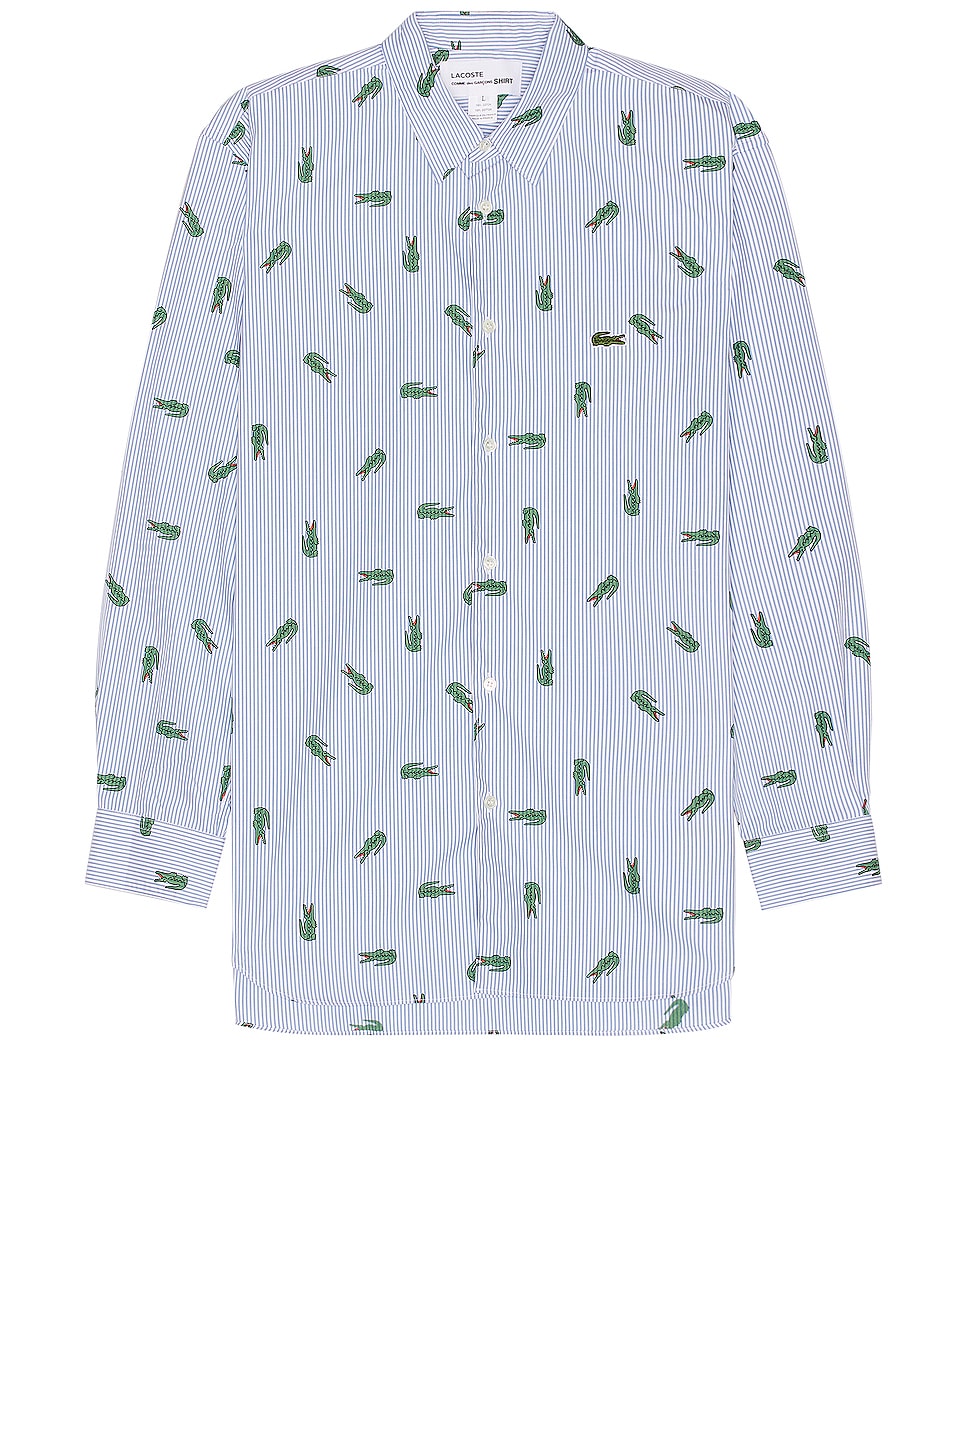 Image 1 of COMME des GARCONS SHIRT X Lacoste 1-a Shirt in Stripe